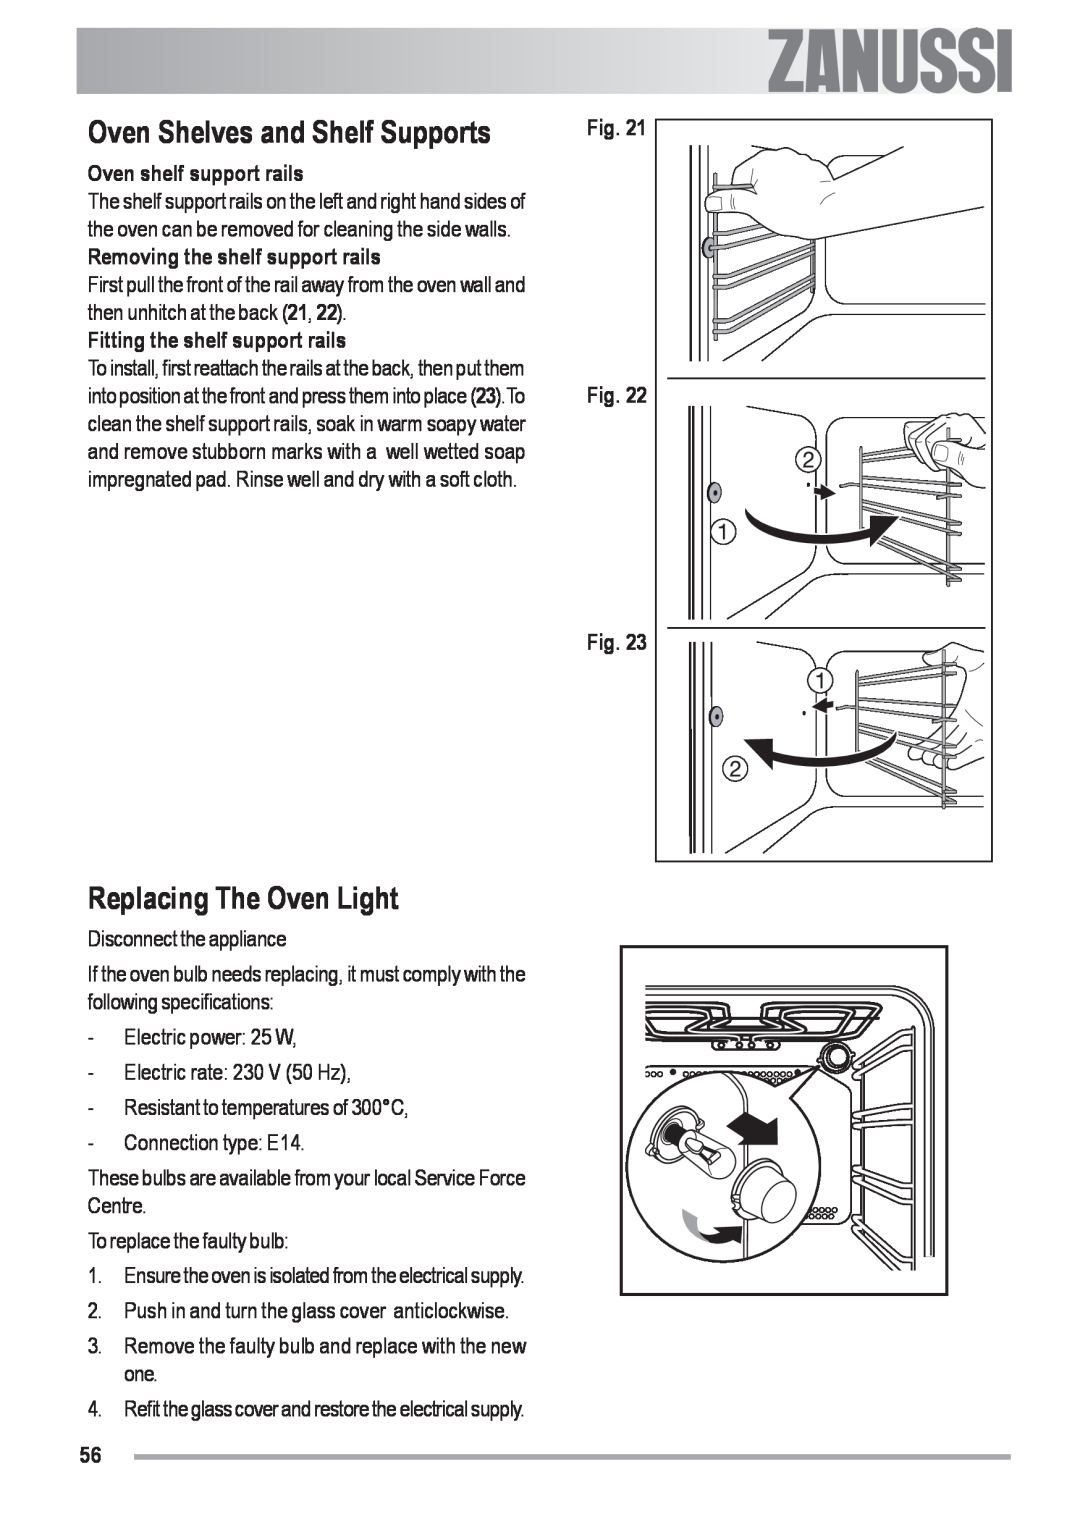 Zanussi ZOU 592 user manual Oven Shelves and Shelf Supports, Replacing The Oven Light, Oven shelf support rails 